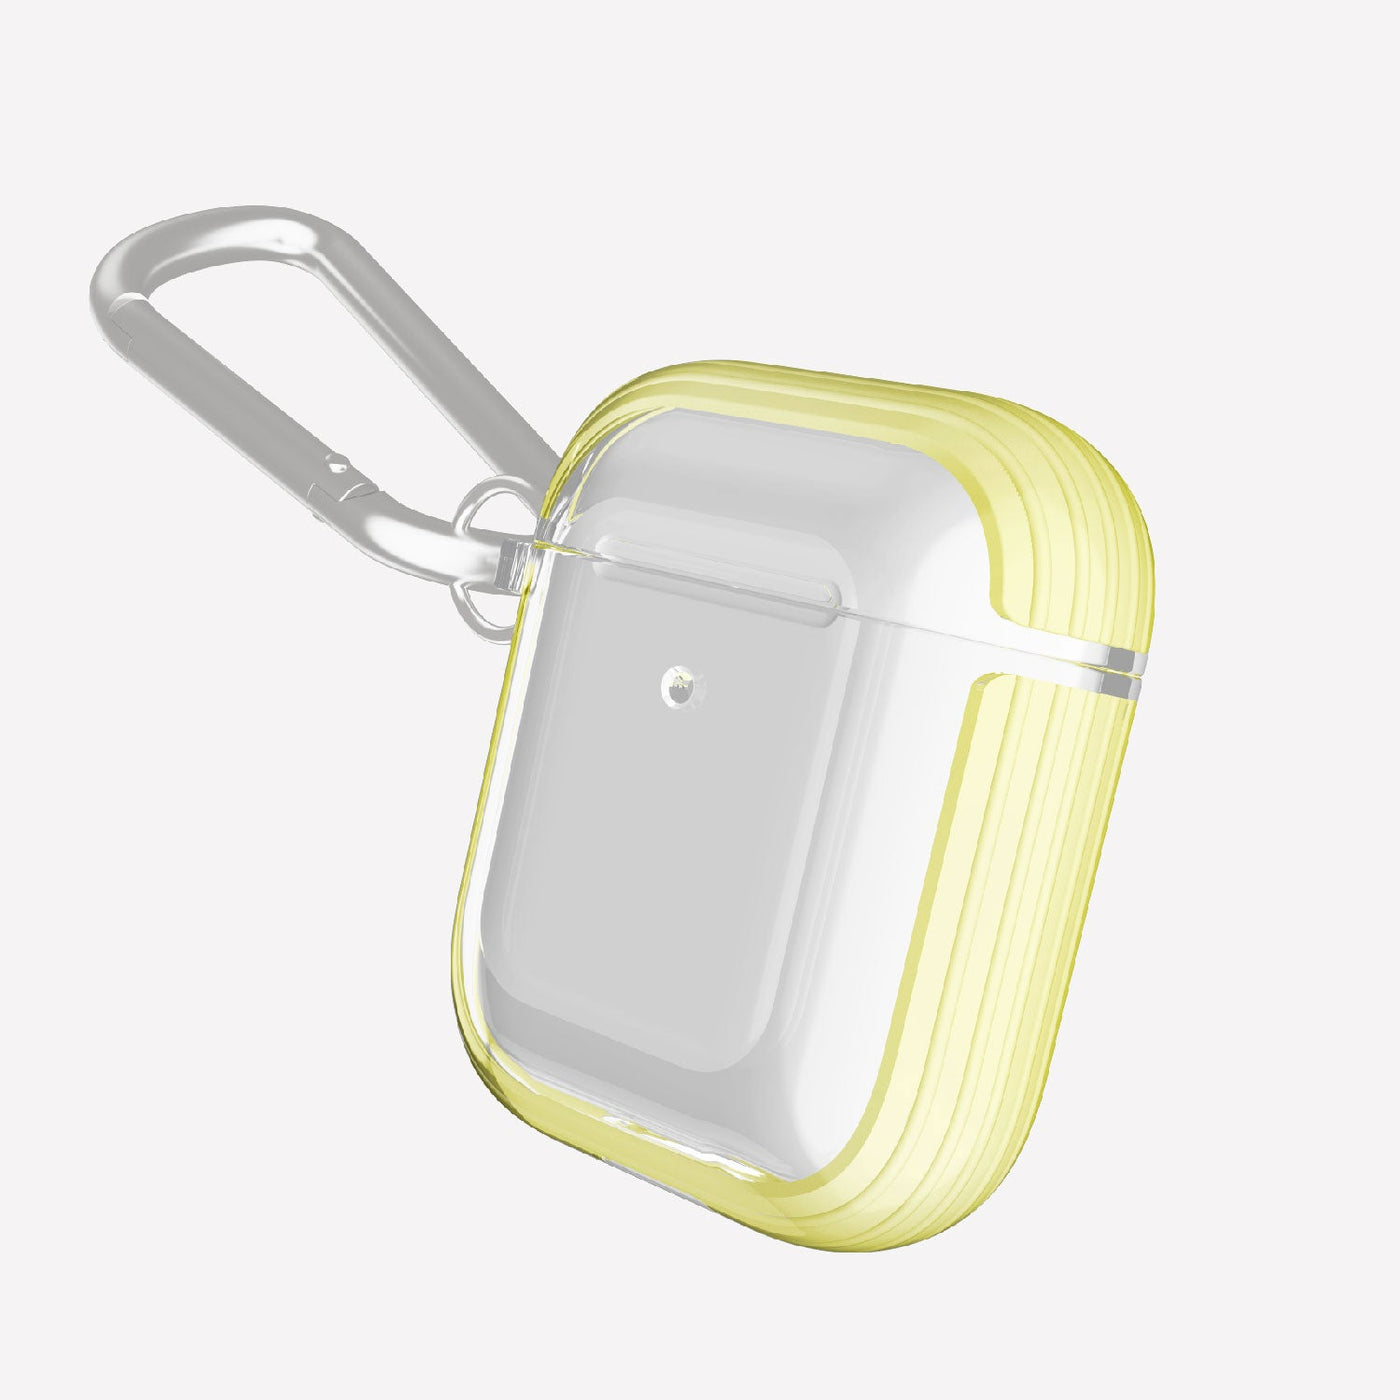 Apple AirPods Case - CLEAR